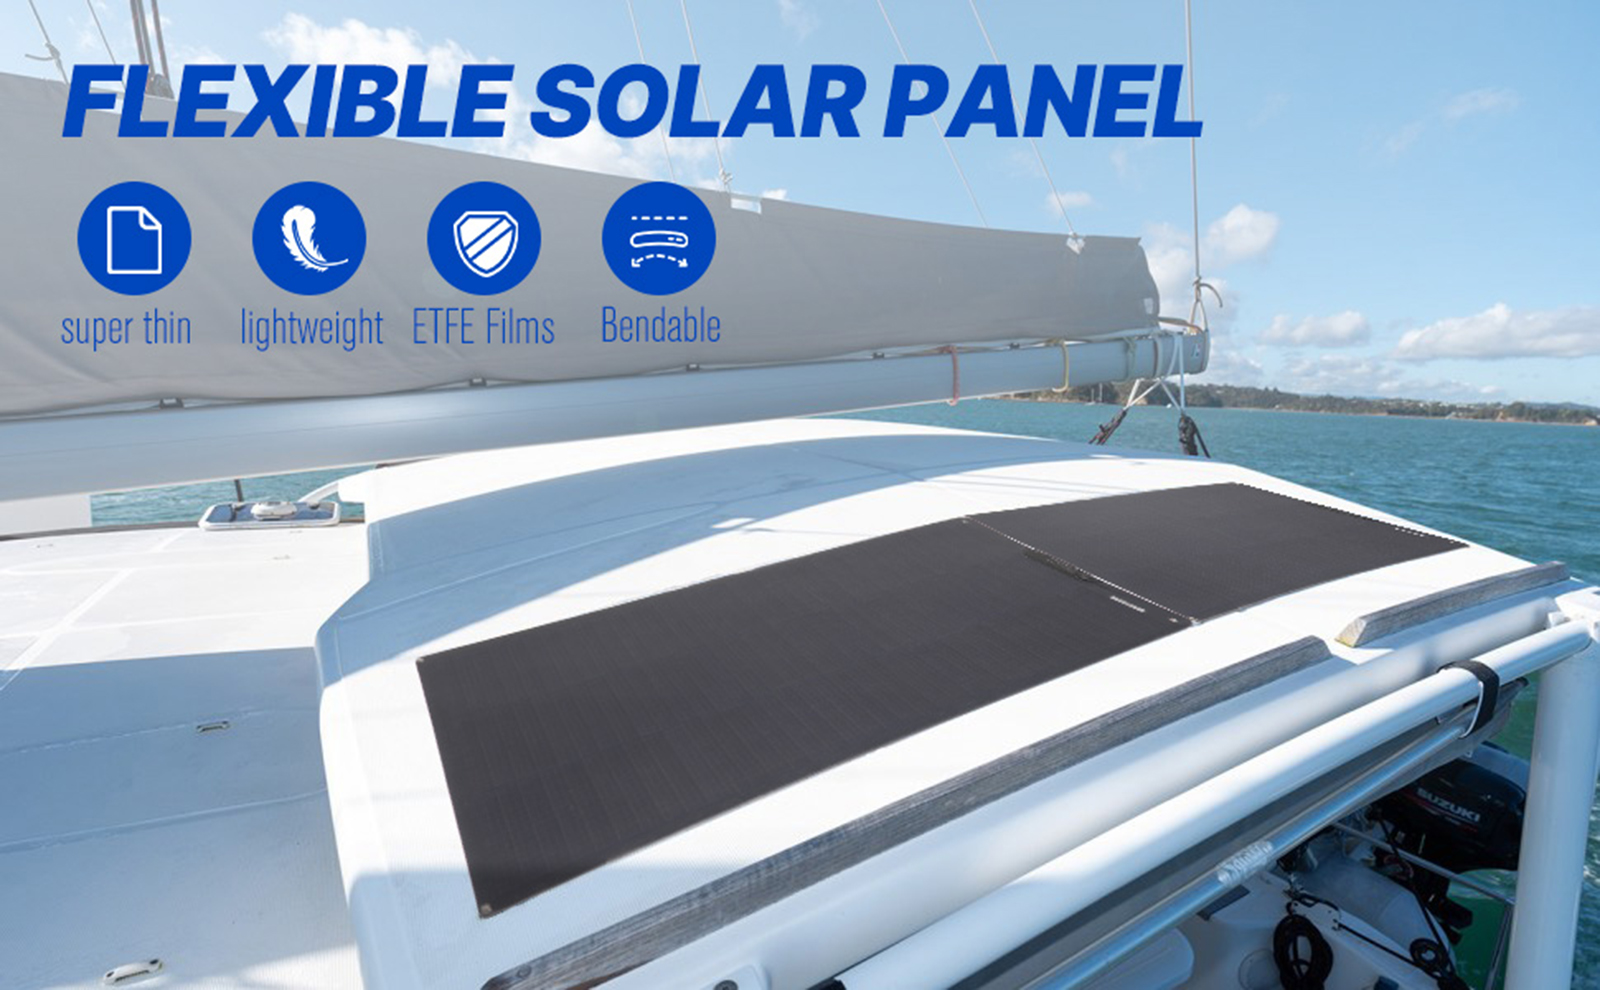 [US Direct] ATEM POWER 100W 12V Monocrystalline Solar Panel Flexible 245 Degree Bendable For RV Tent Roof Boat Cabin Marine Camping 44.49 x 20.47 x 1.26 inches